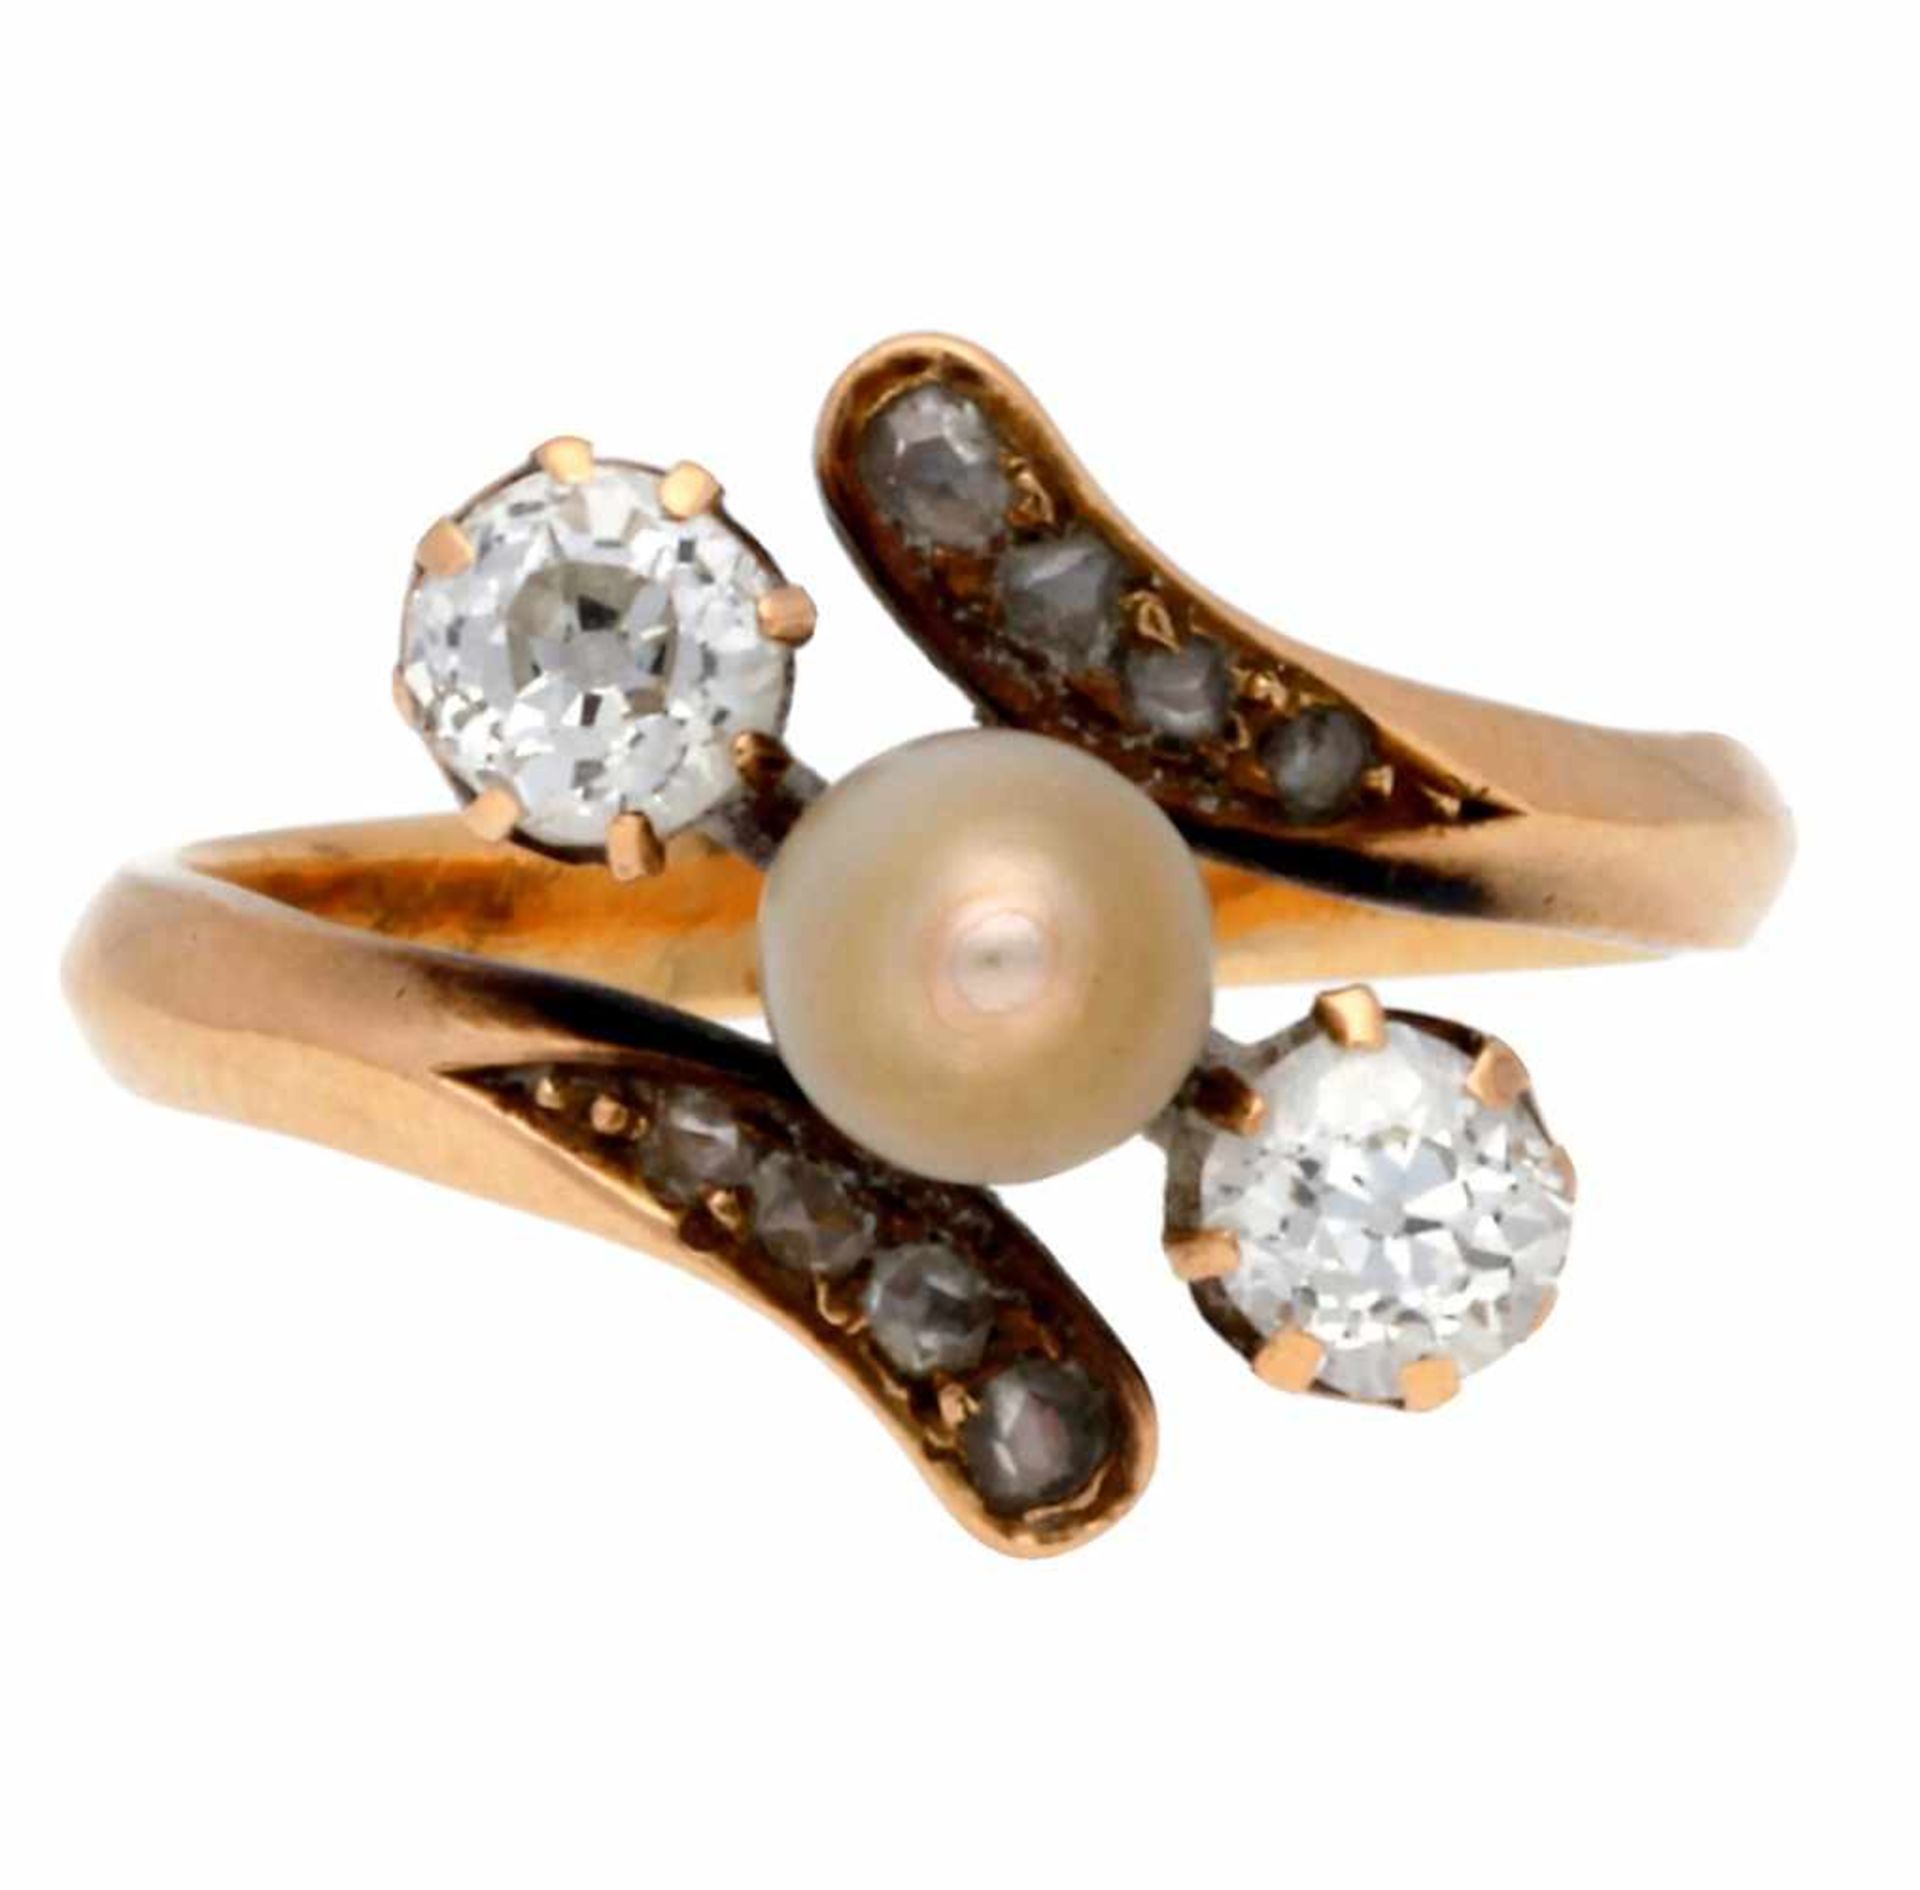 Modernist triplet ring in gold and diamonds.Gold, old brilliant and rose cut diamonds, 0.54 cts